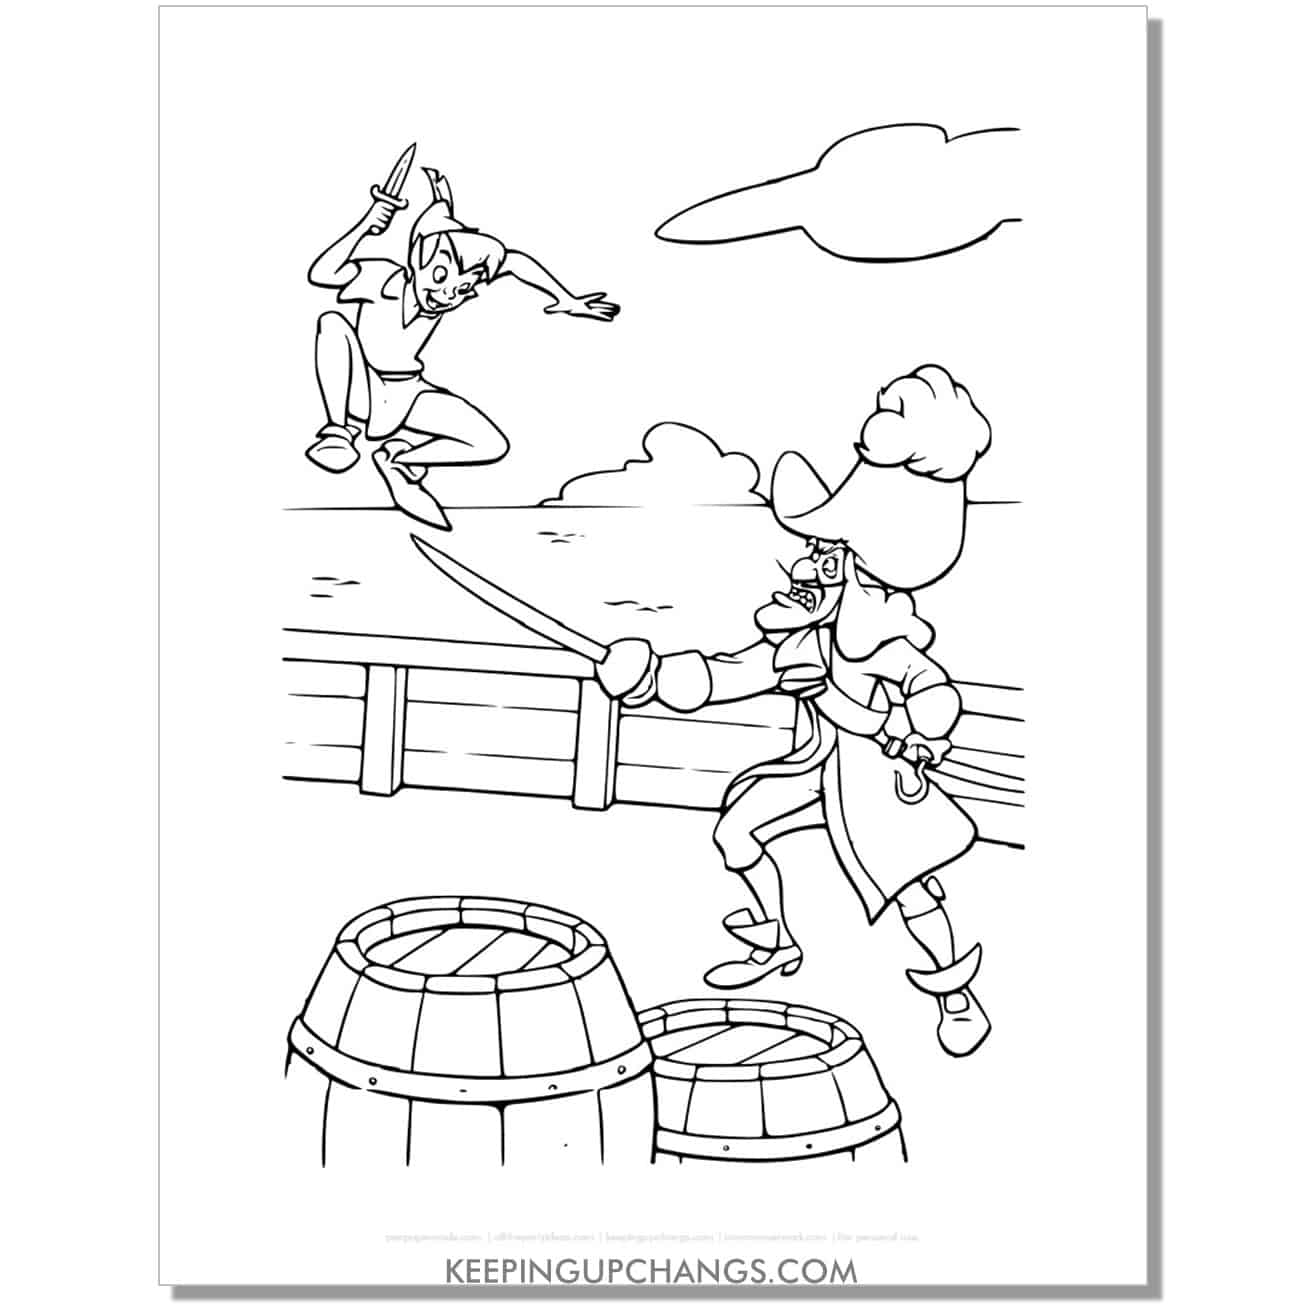 captain hook fights peter pan coloring page, sheet.